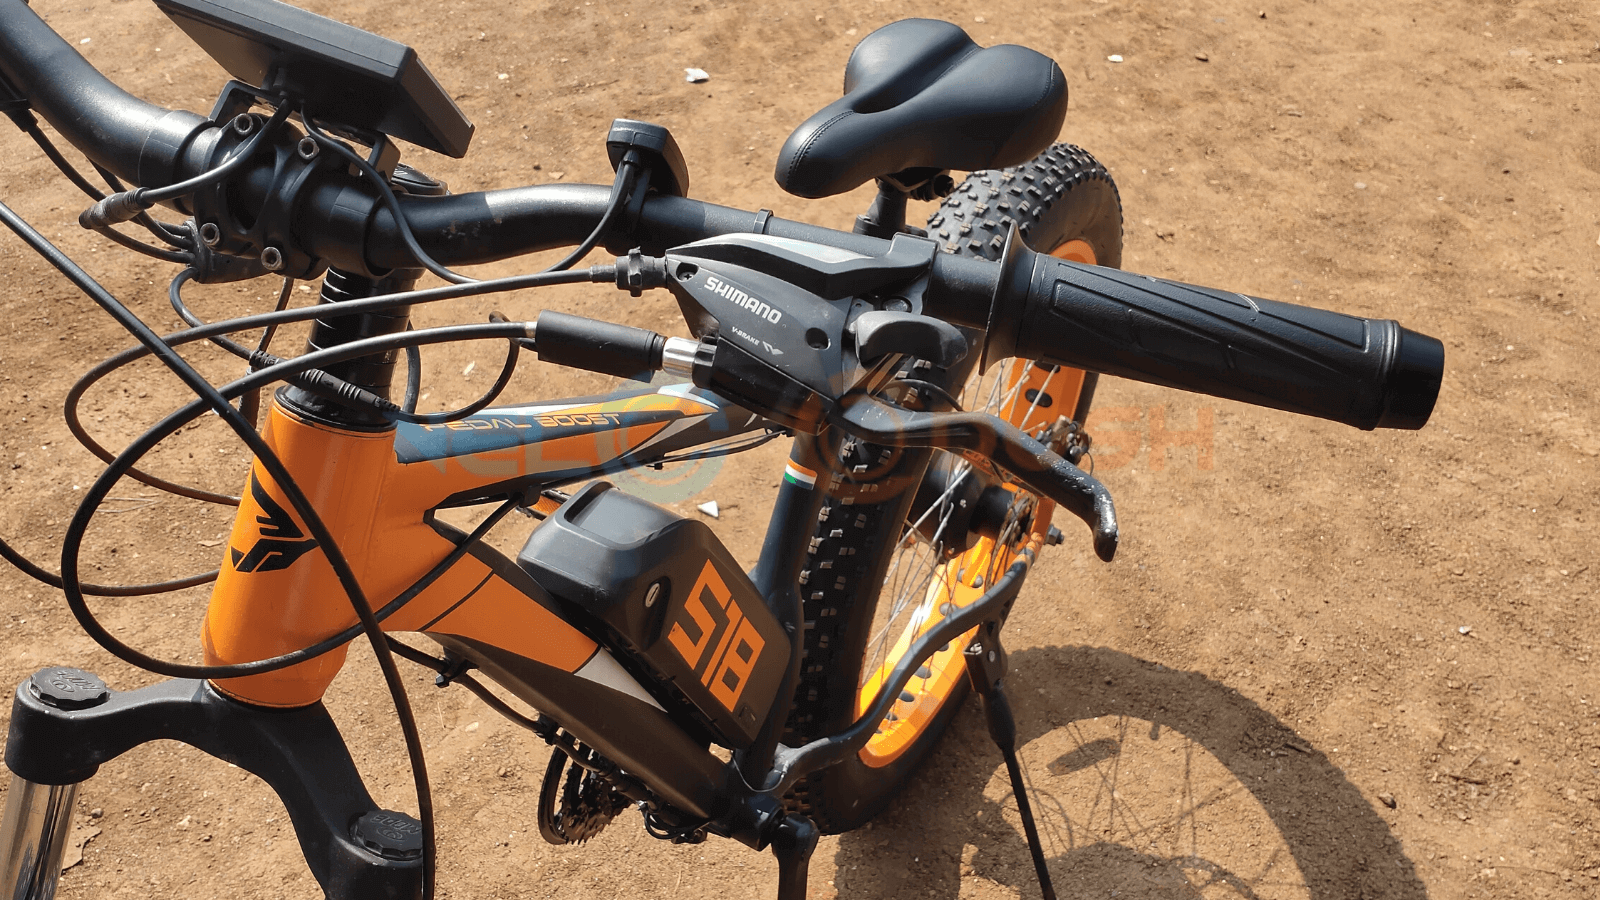 Firefox Road Runner Pro D Review [2022] - VeloCrushIndia